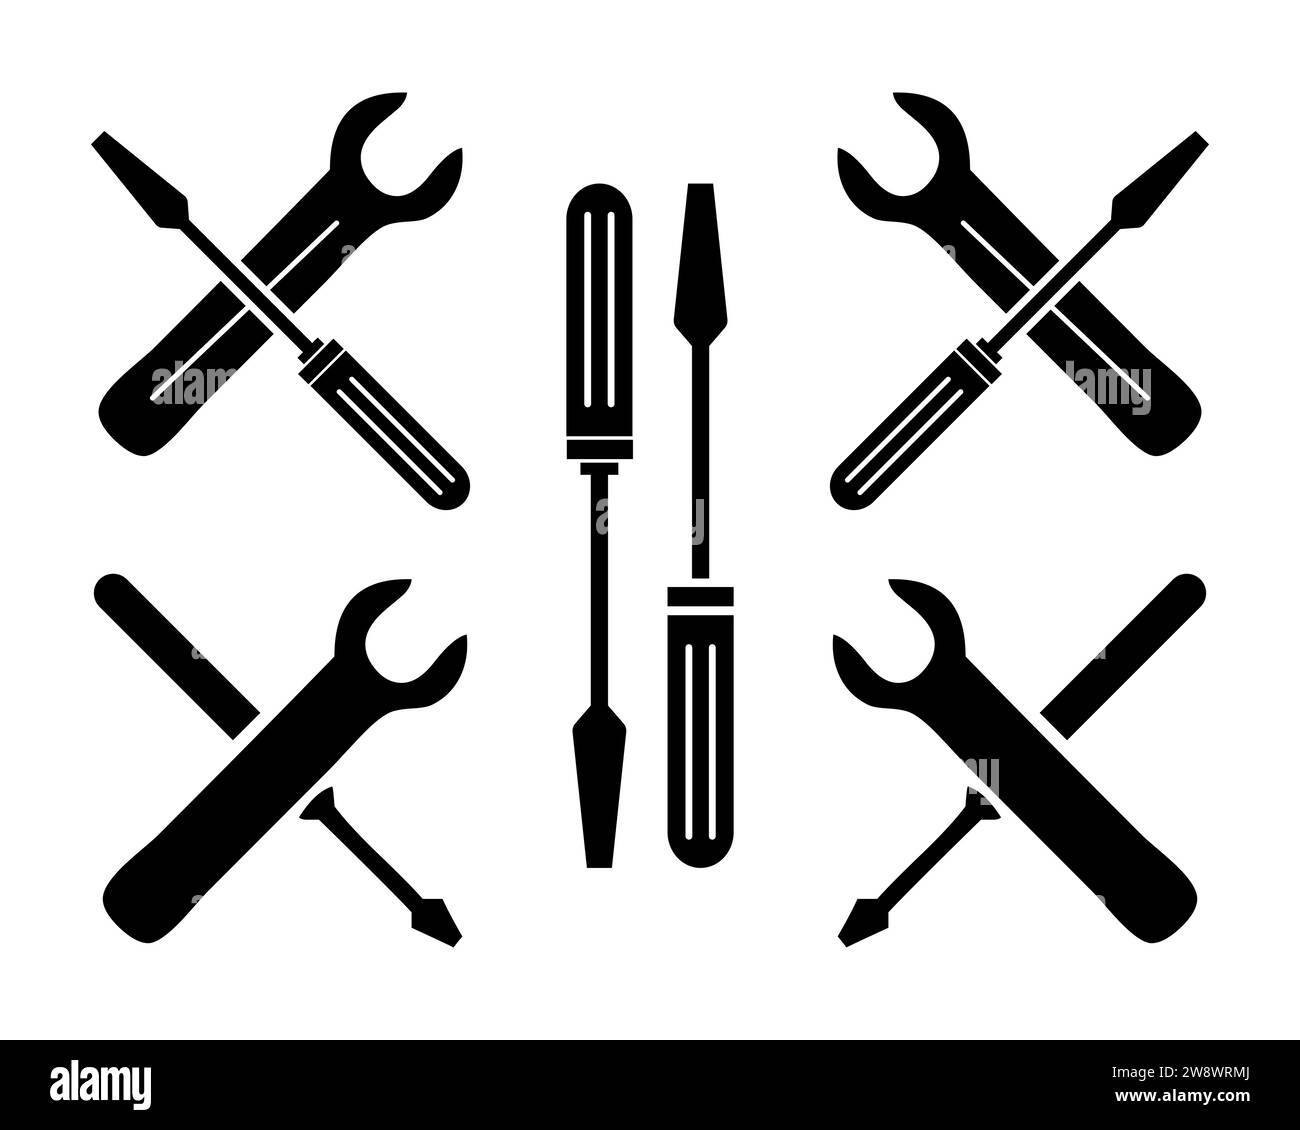 Maintenance service tool symbol, setting and repair sign, wrench with screwdriver icon. Stock Vector